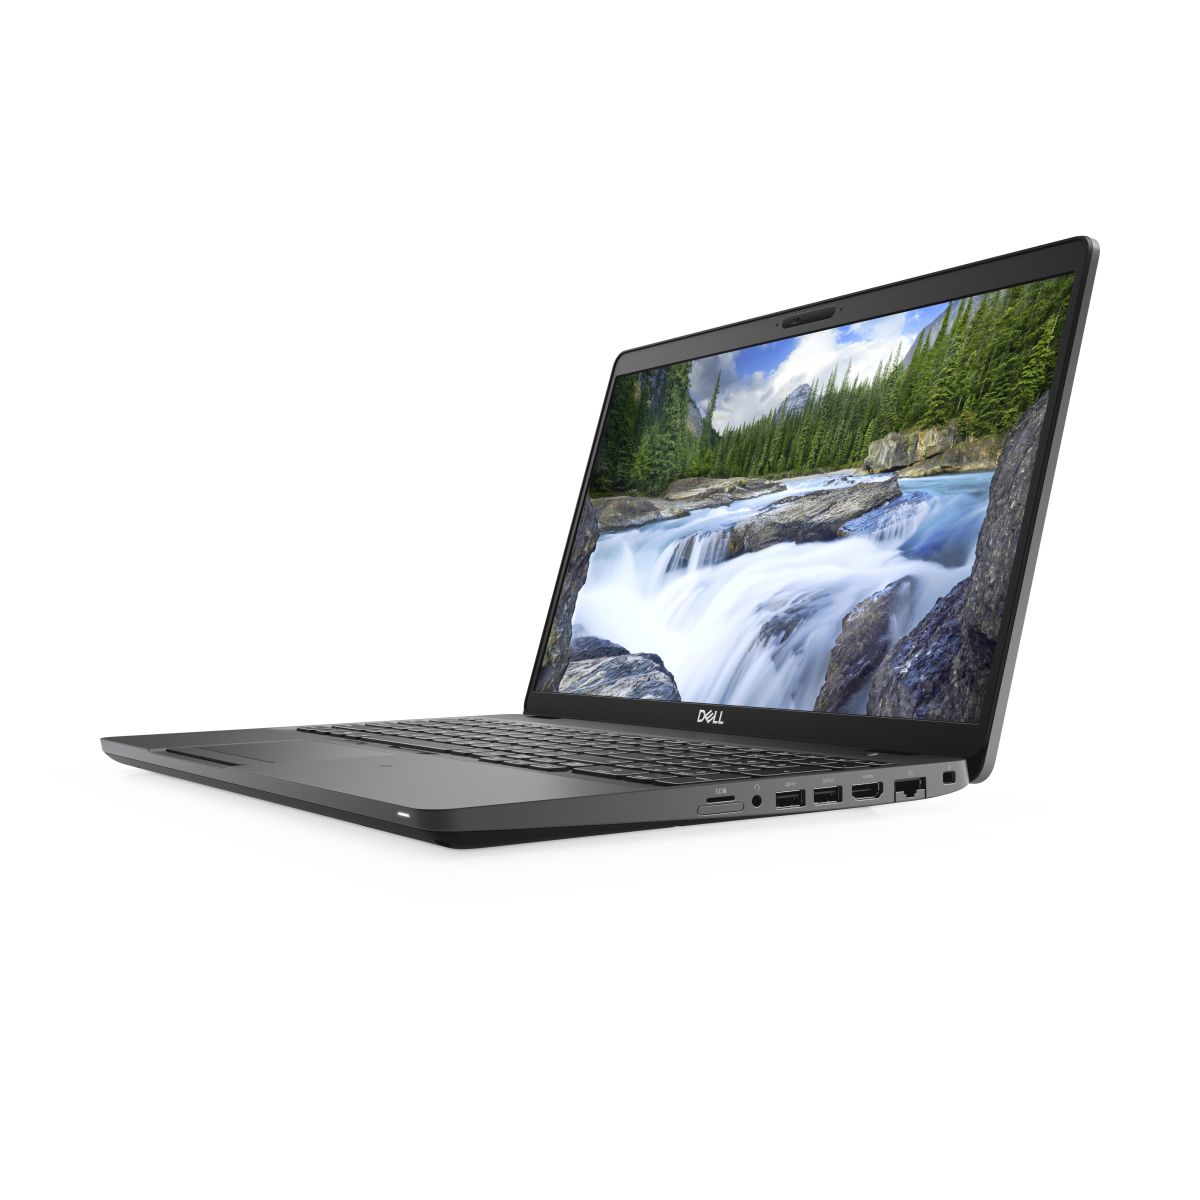 DELL Precision 3540 - 51WC7 laptop specifications